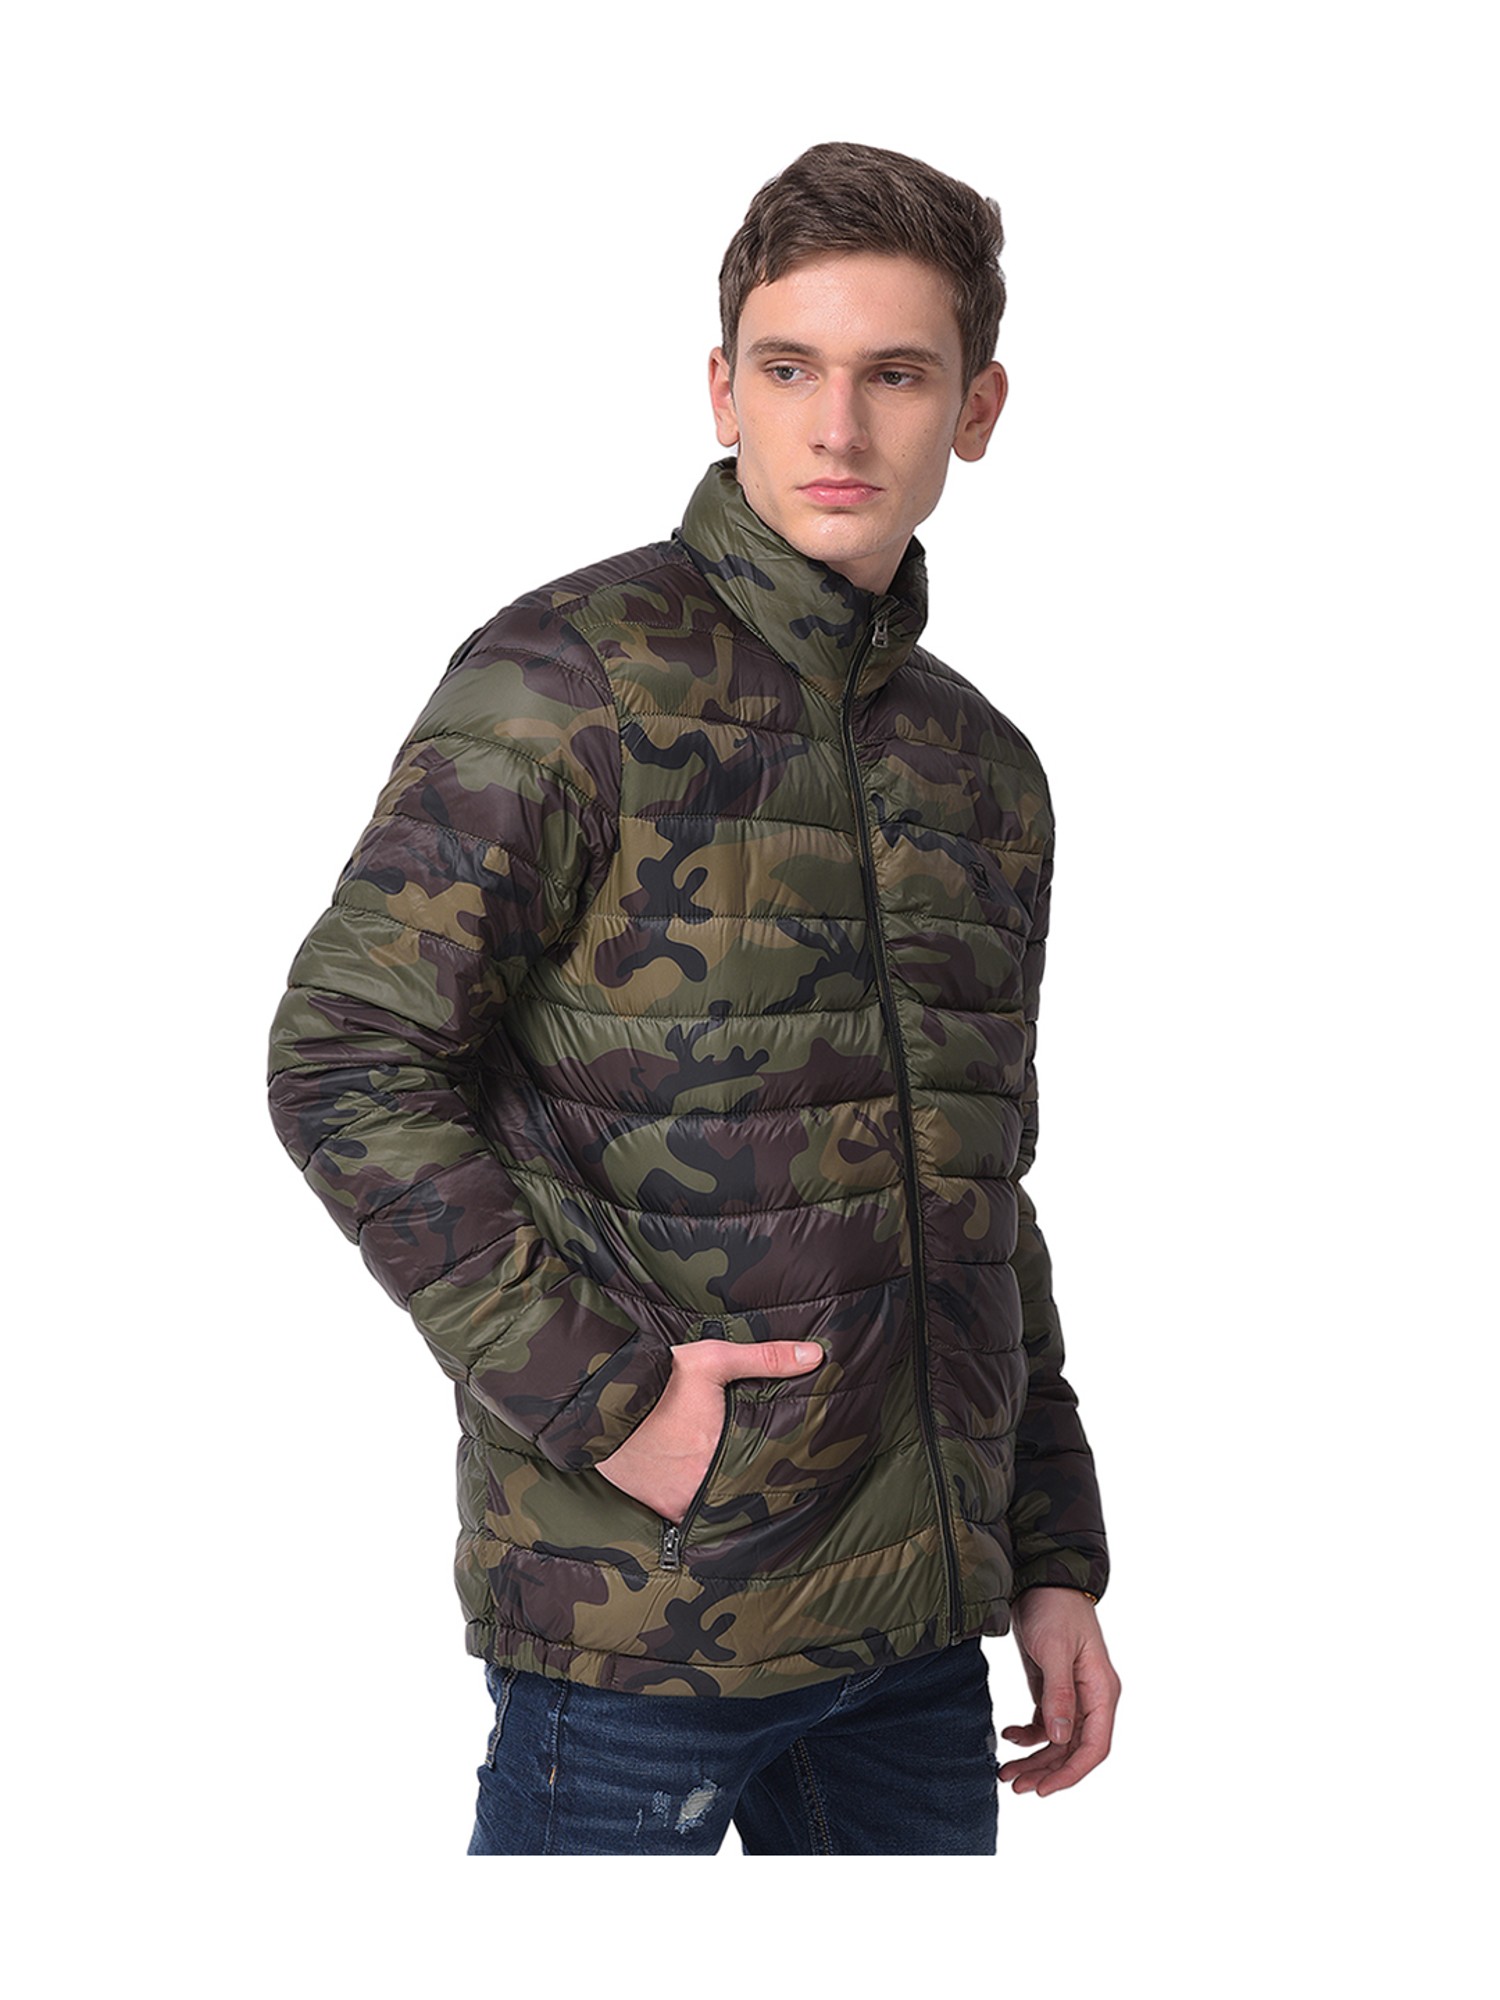 Buy Woodland Jackets Online for Men at Best Price on Myntra